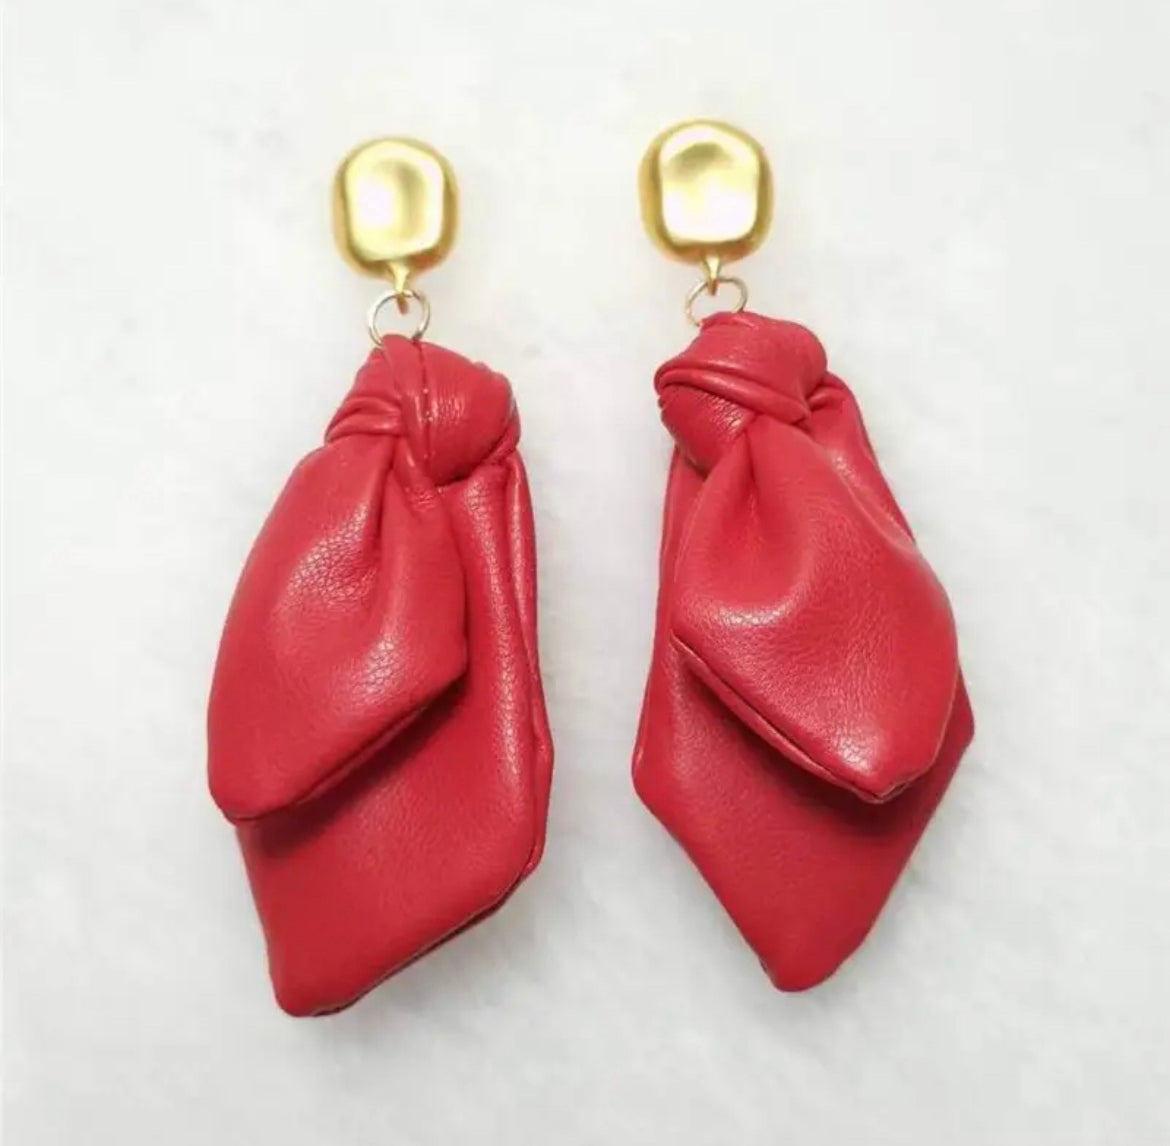 Red leather earrings